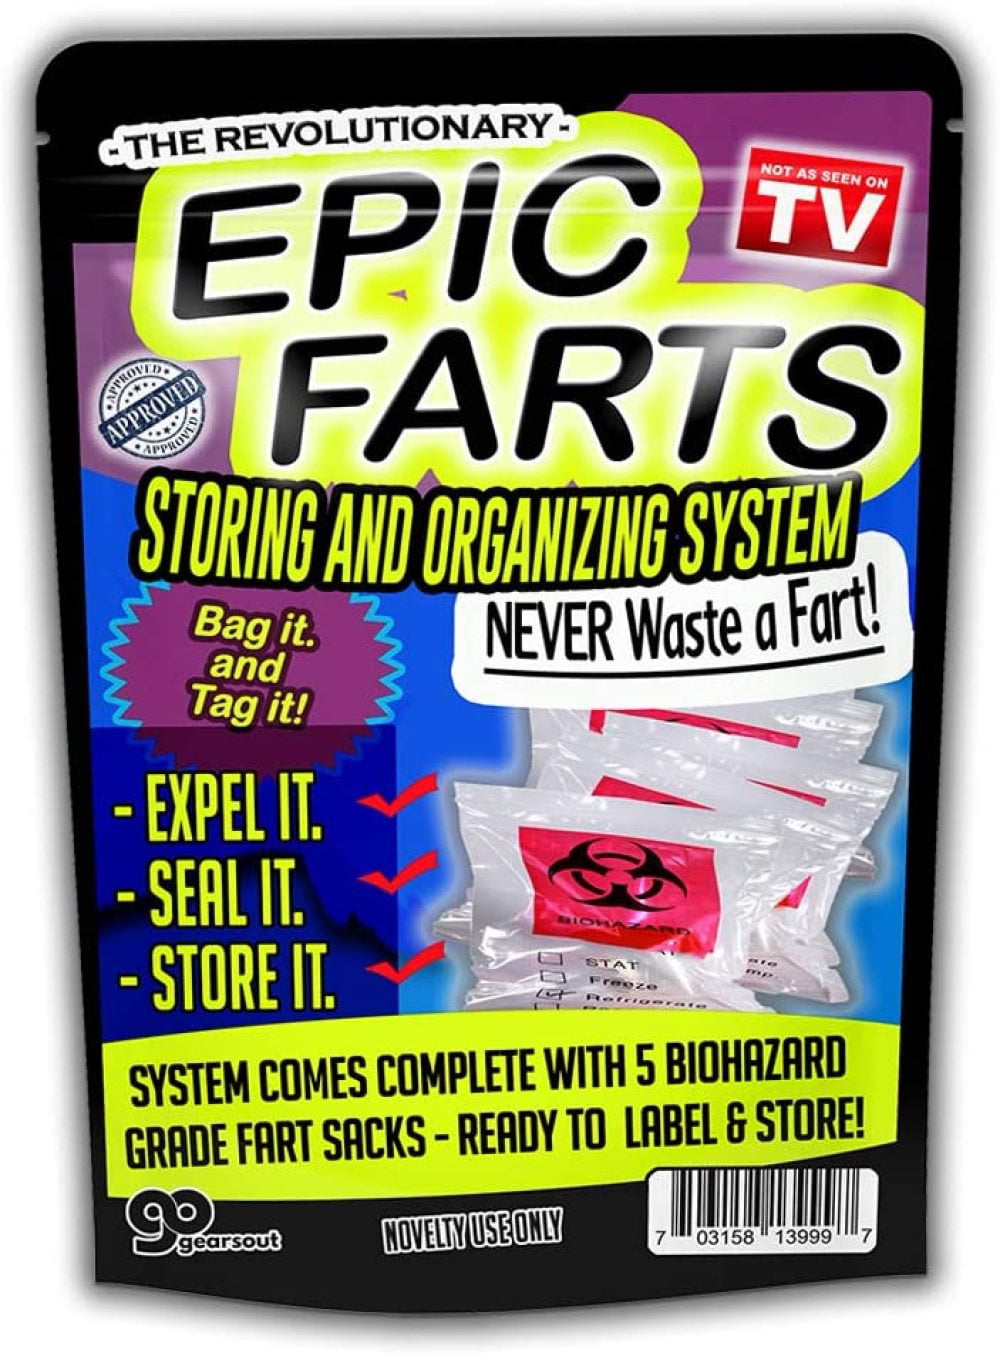 2 Packs of 3 Fart sweets.New in Sealed Packs.Delivery Guaranteed. 